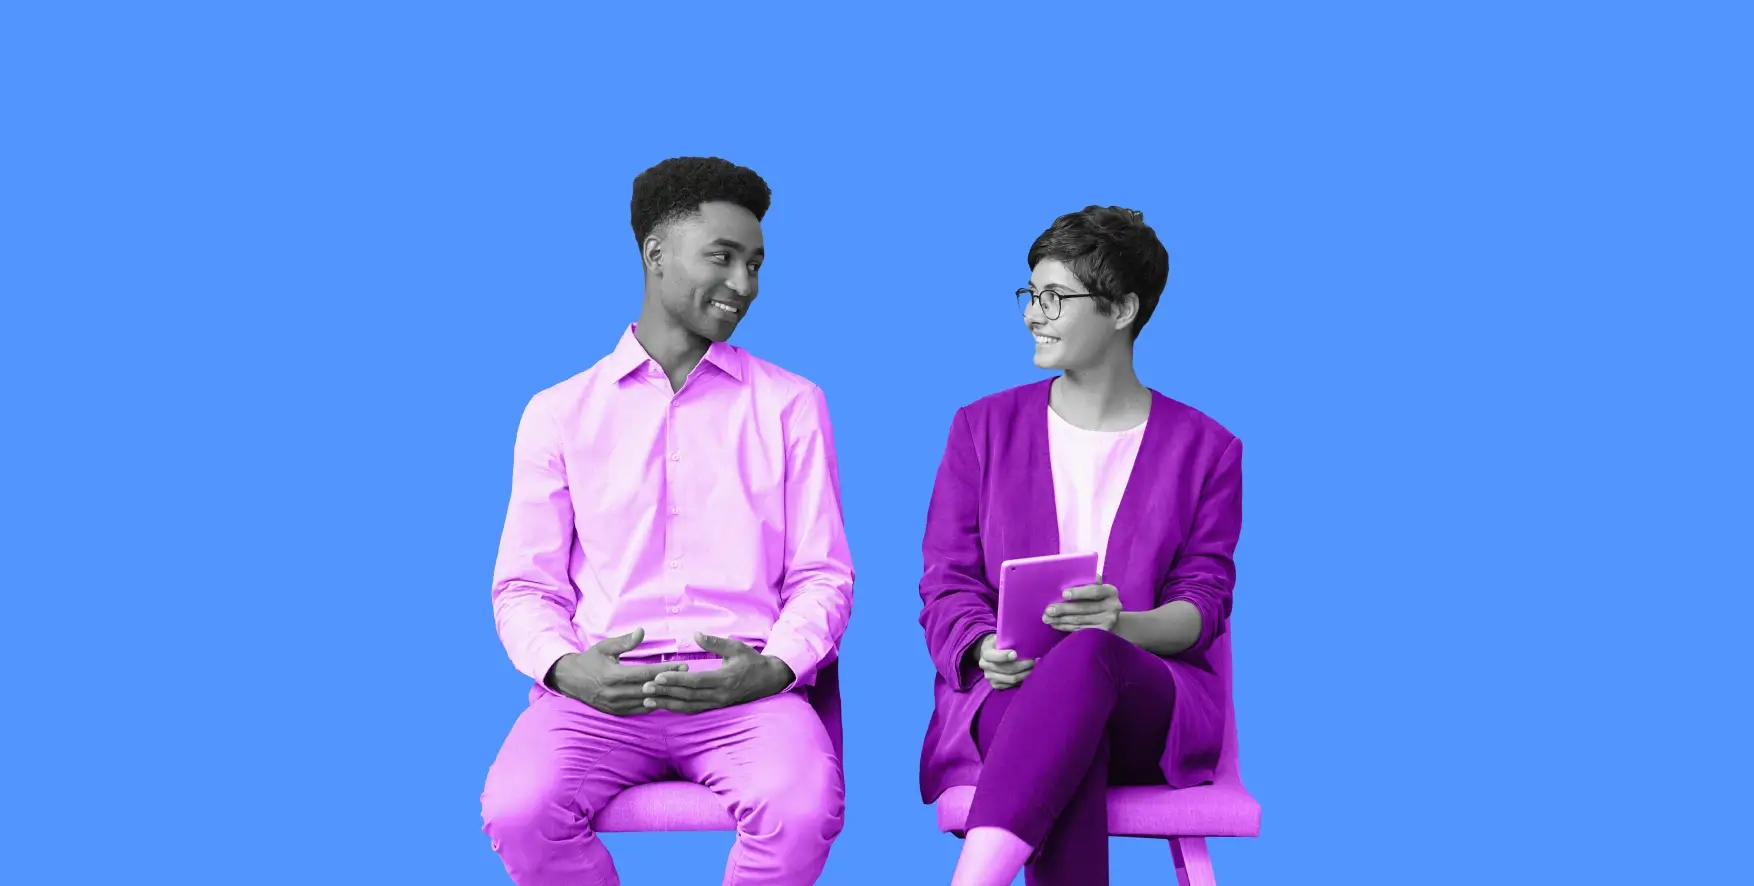 two people sitting next to each other during an interview